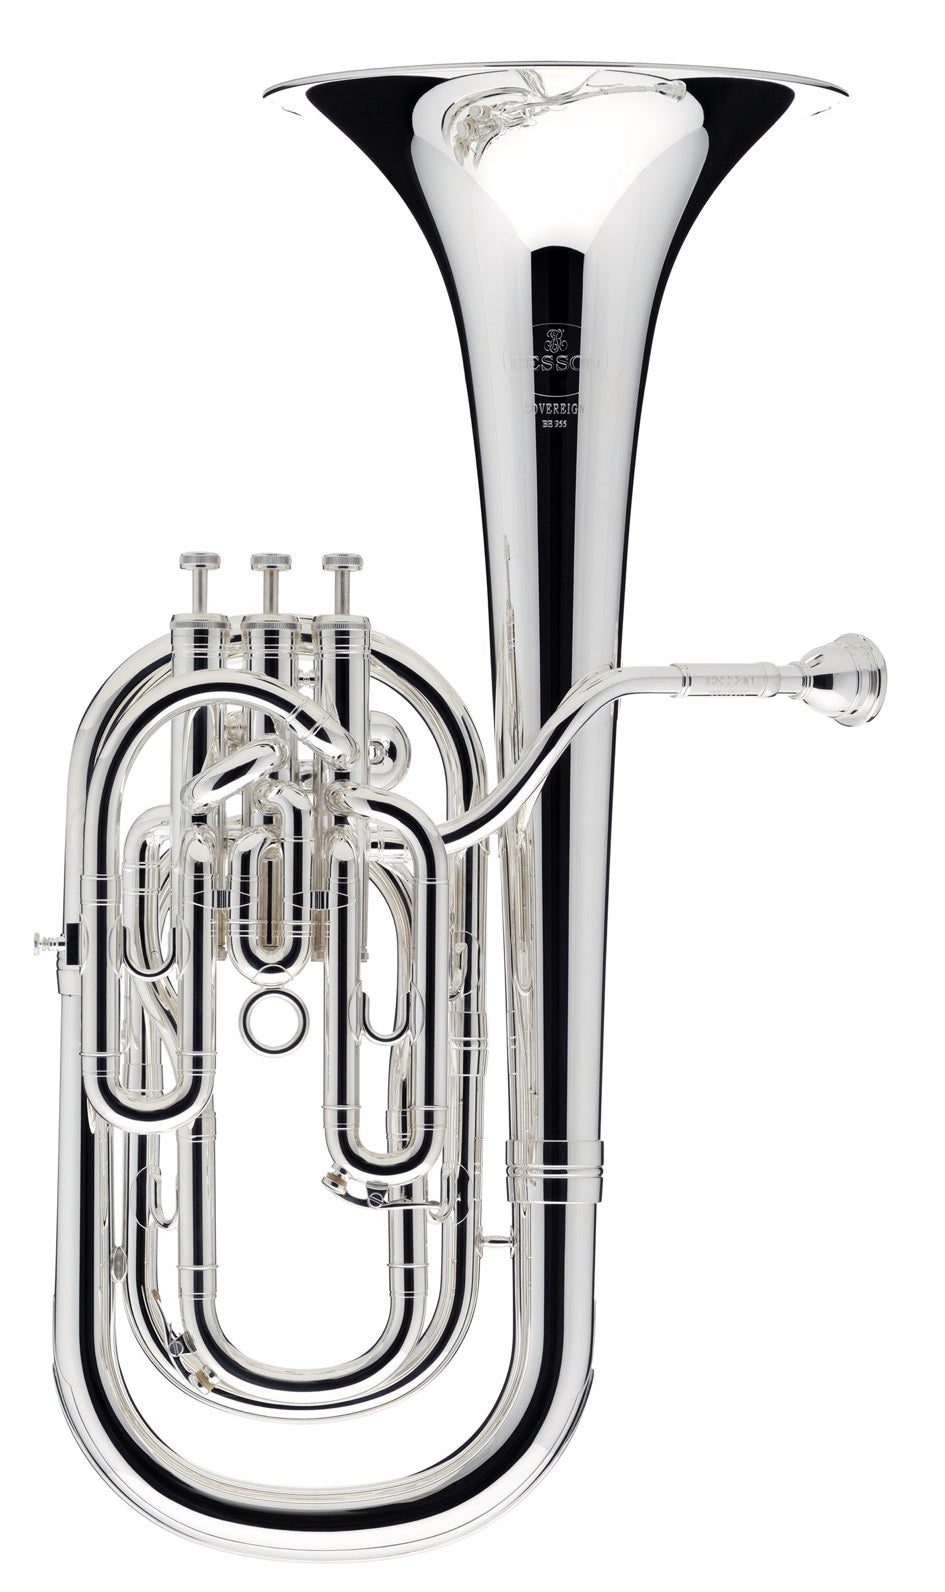 Besson Sovereign Baritone horn outfit